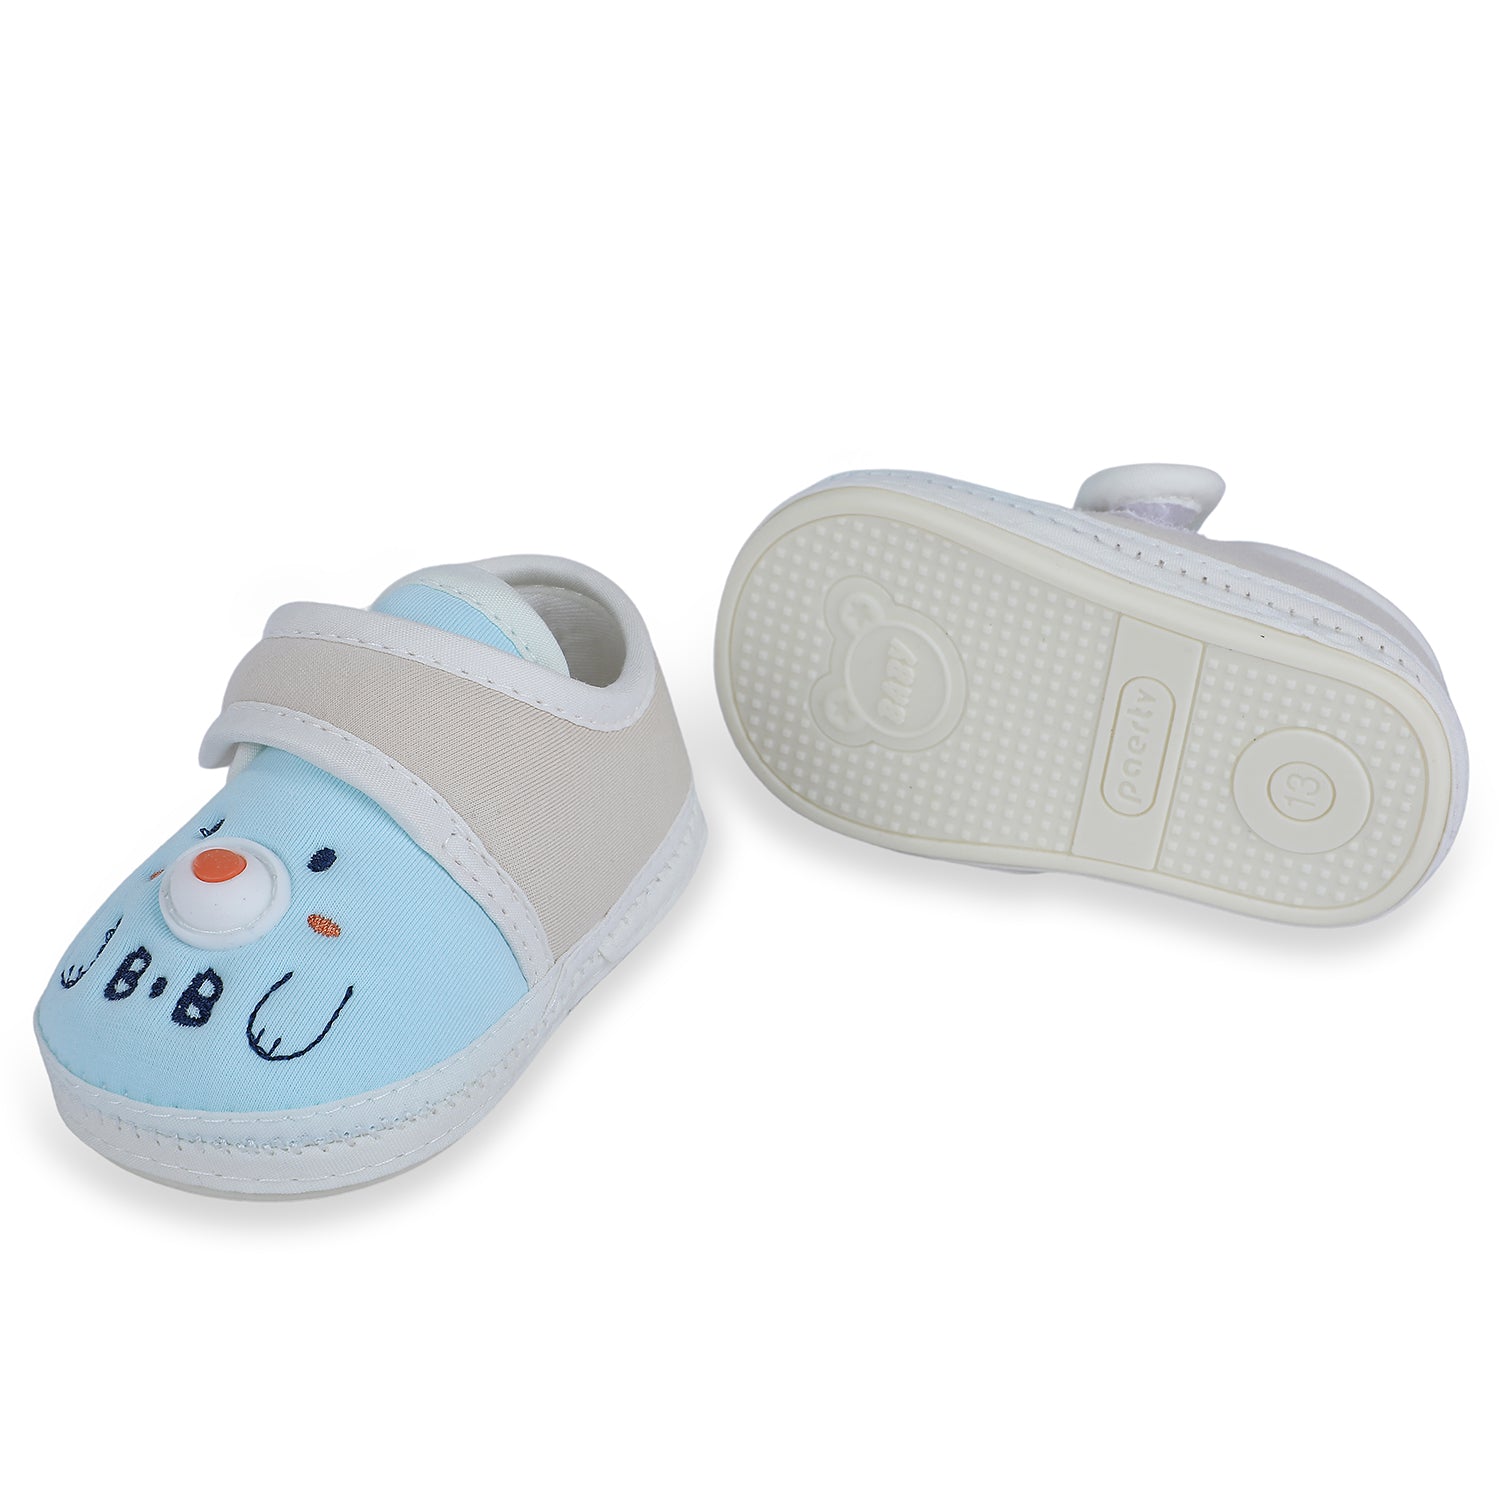 Baby Moo Smiling Bear Soft Sole Anti-Slip Booties - Blue - Baby Moo